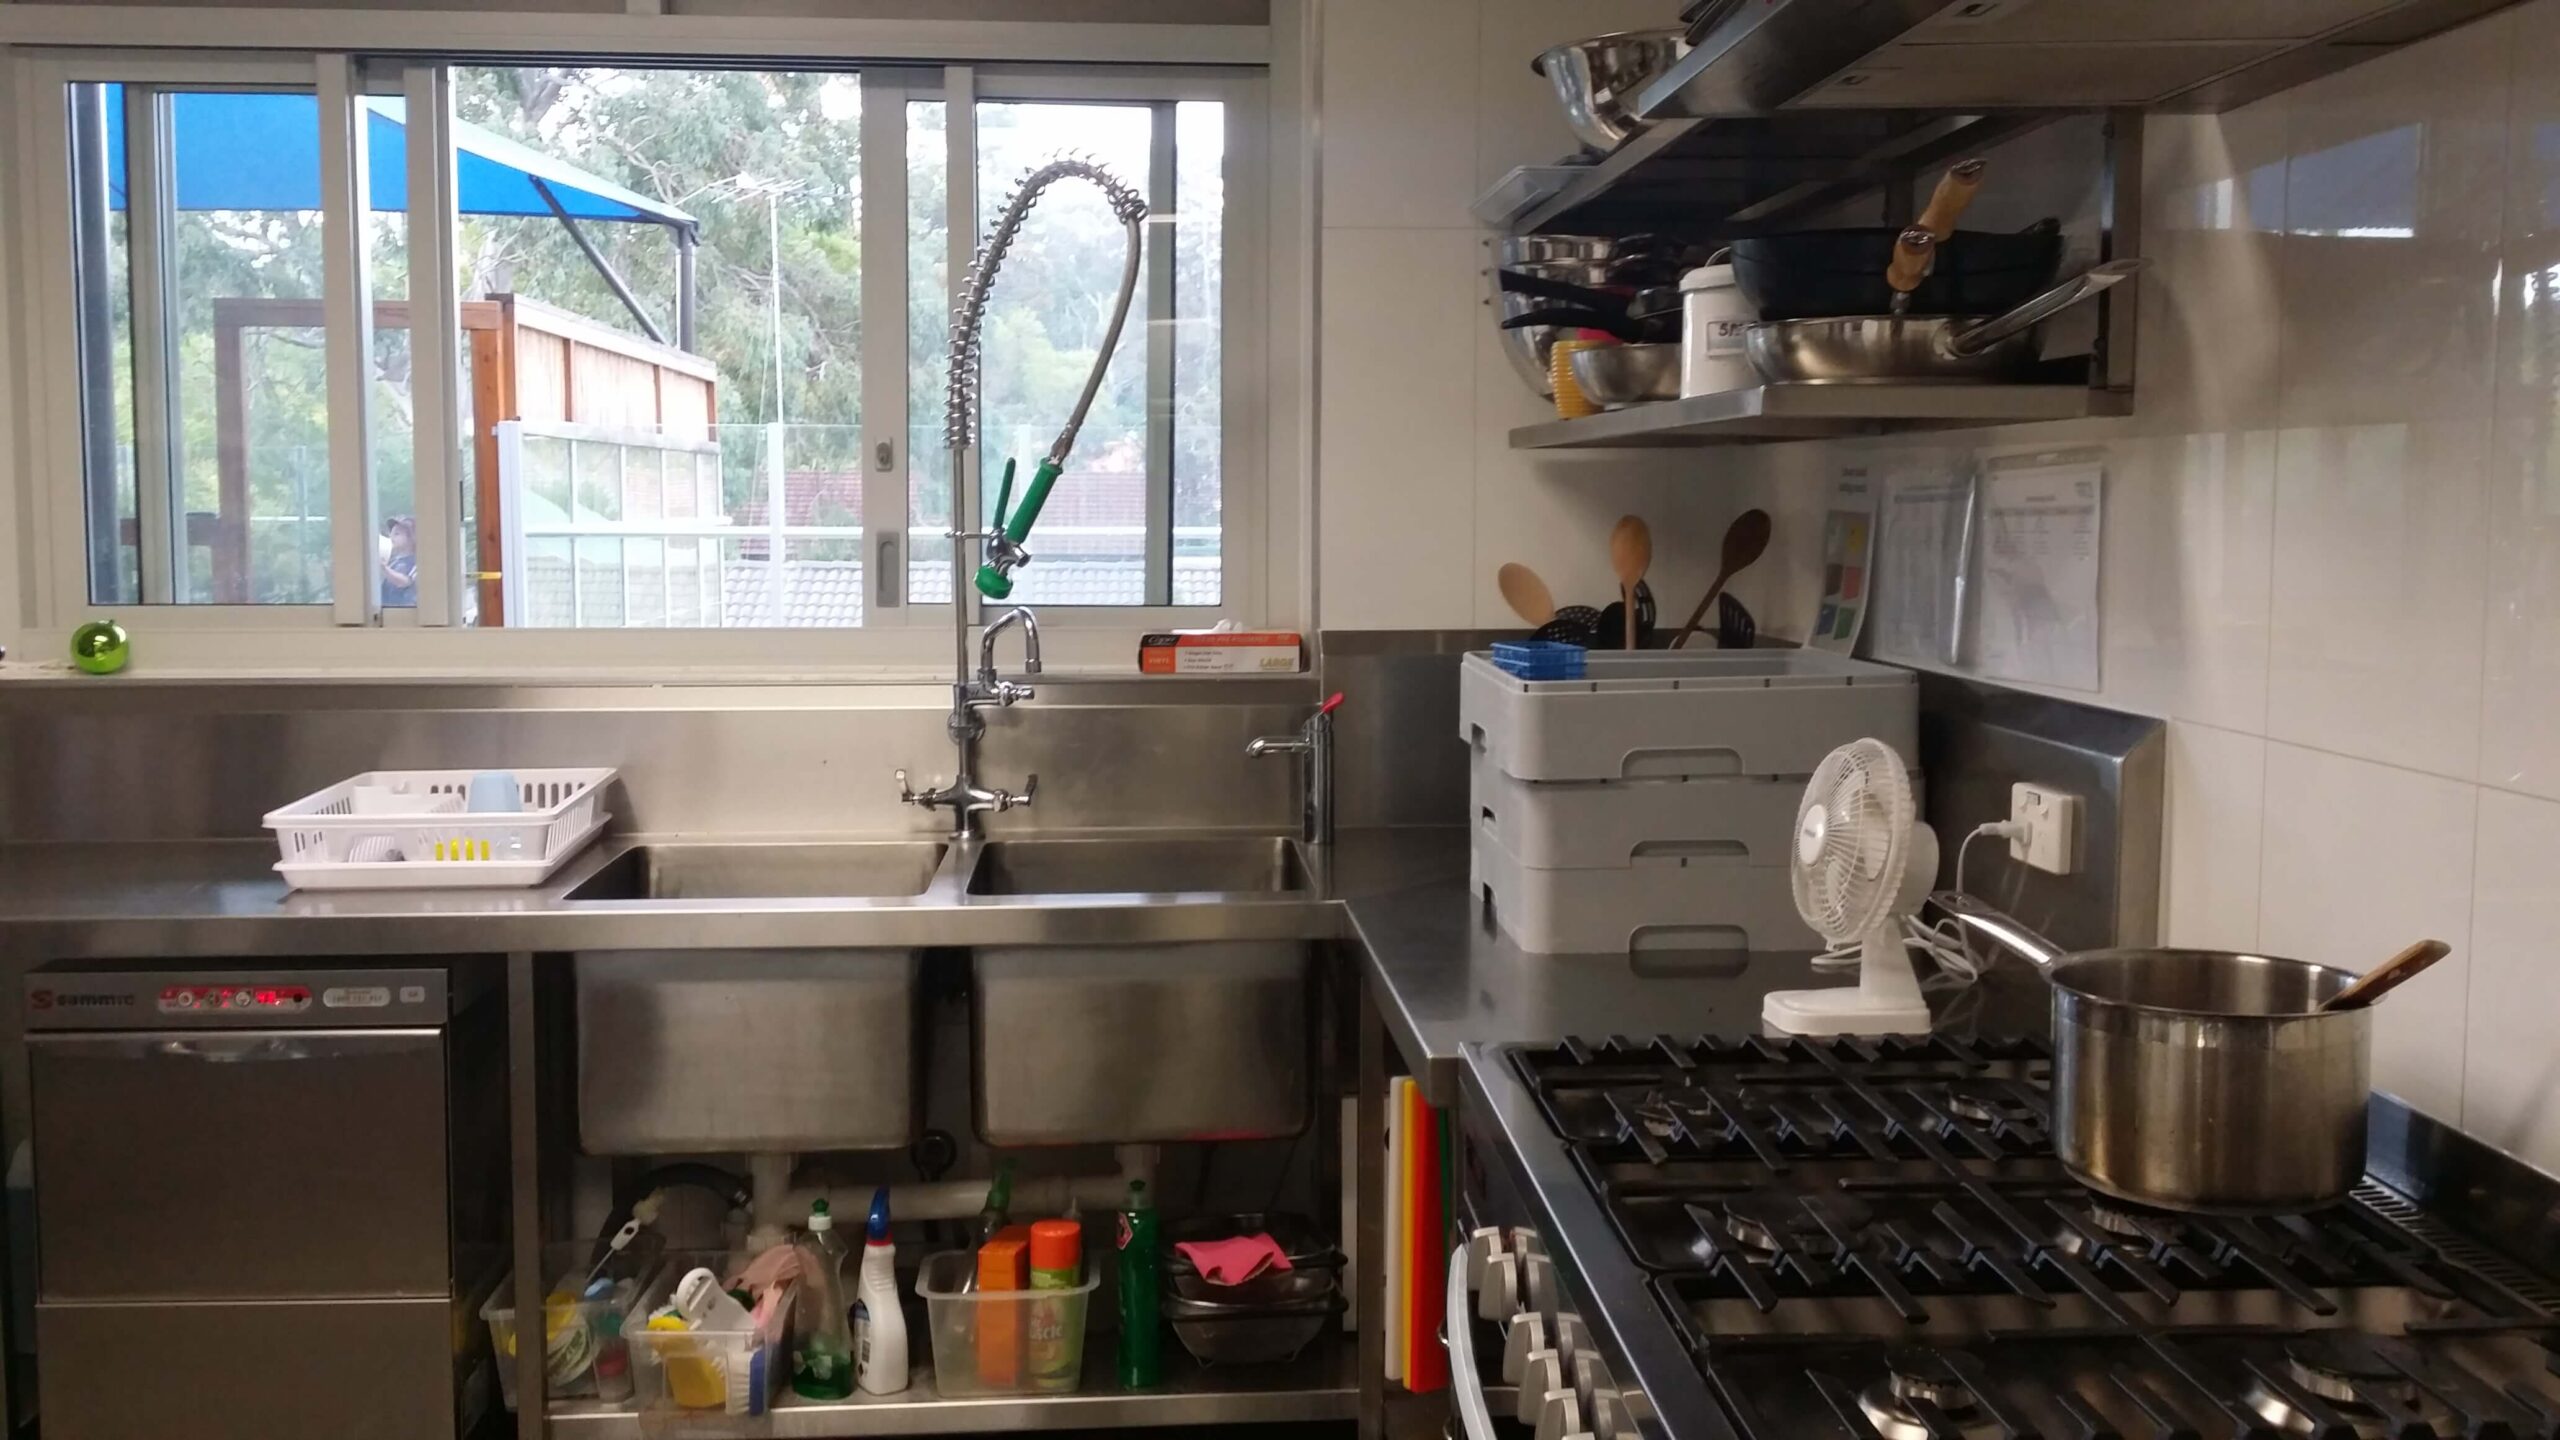 Image of before and after school care kitchen